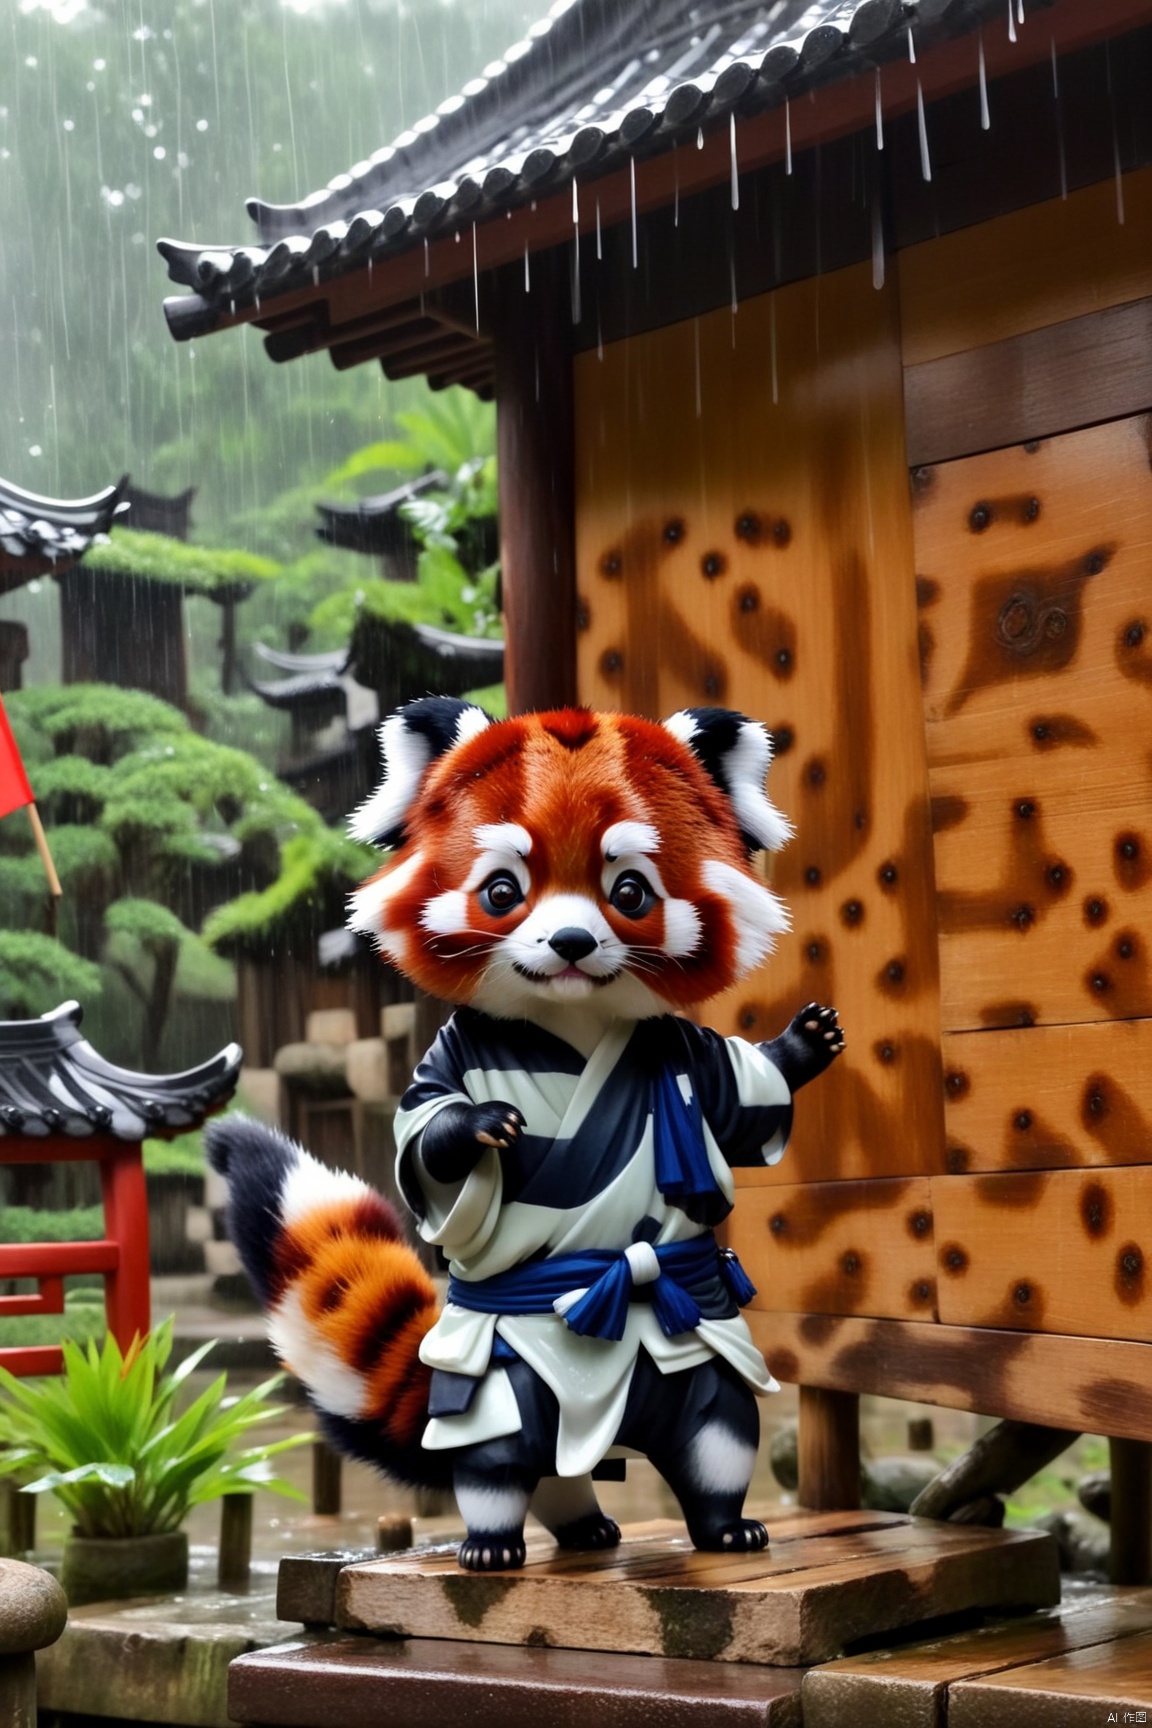 ink style,Iancient China,rainy,a wood house with flag,a cute redpanda stand faraway,hands up 